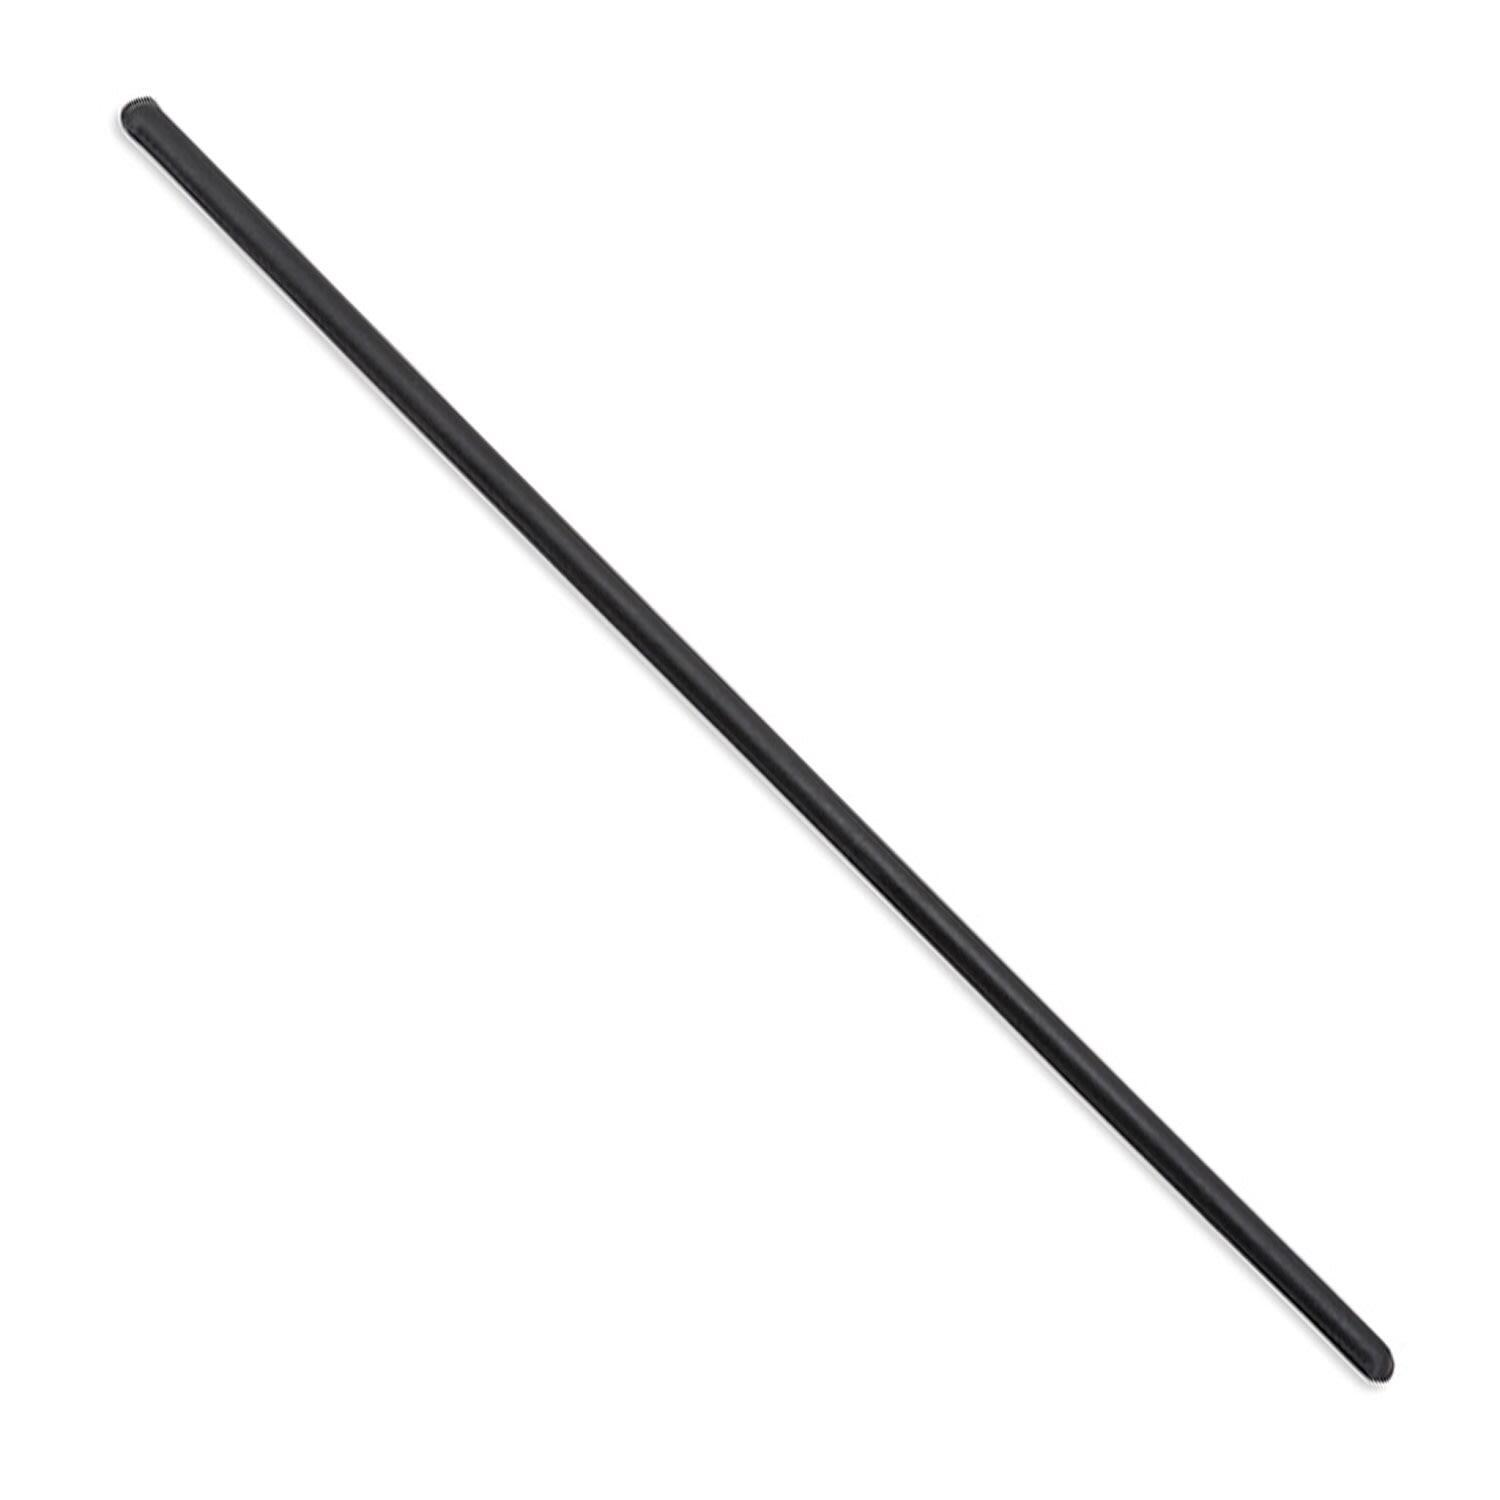 SHIRES Leather Horse Show Cane (Black)